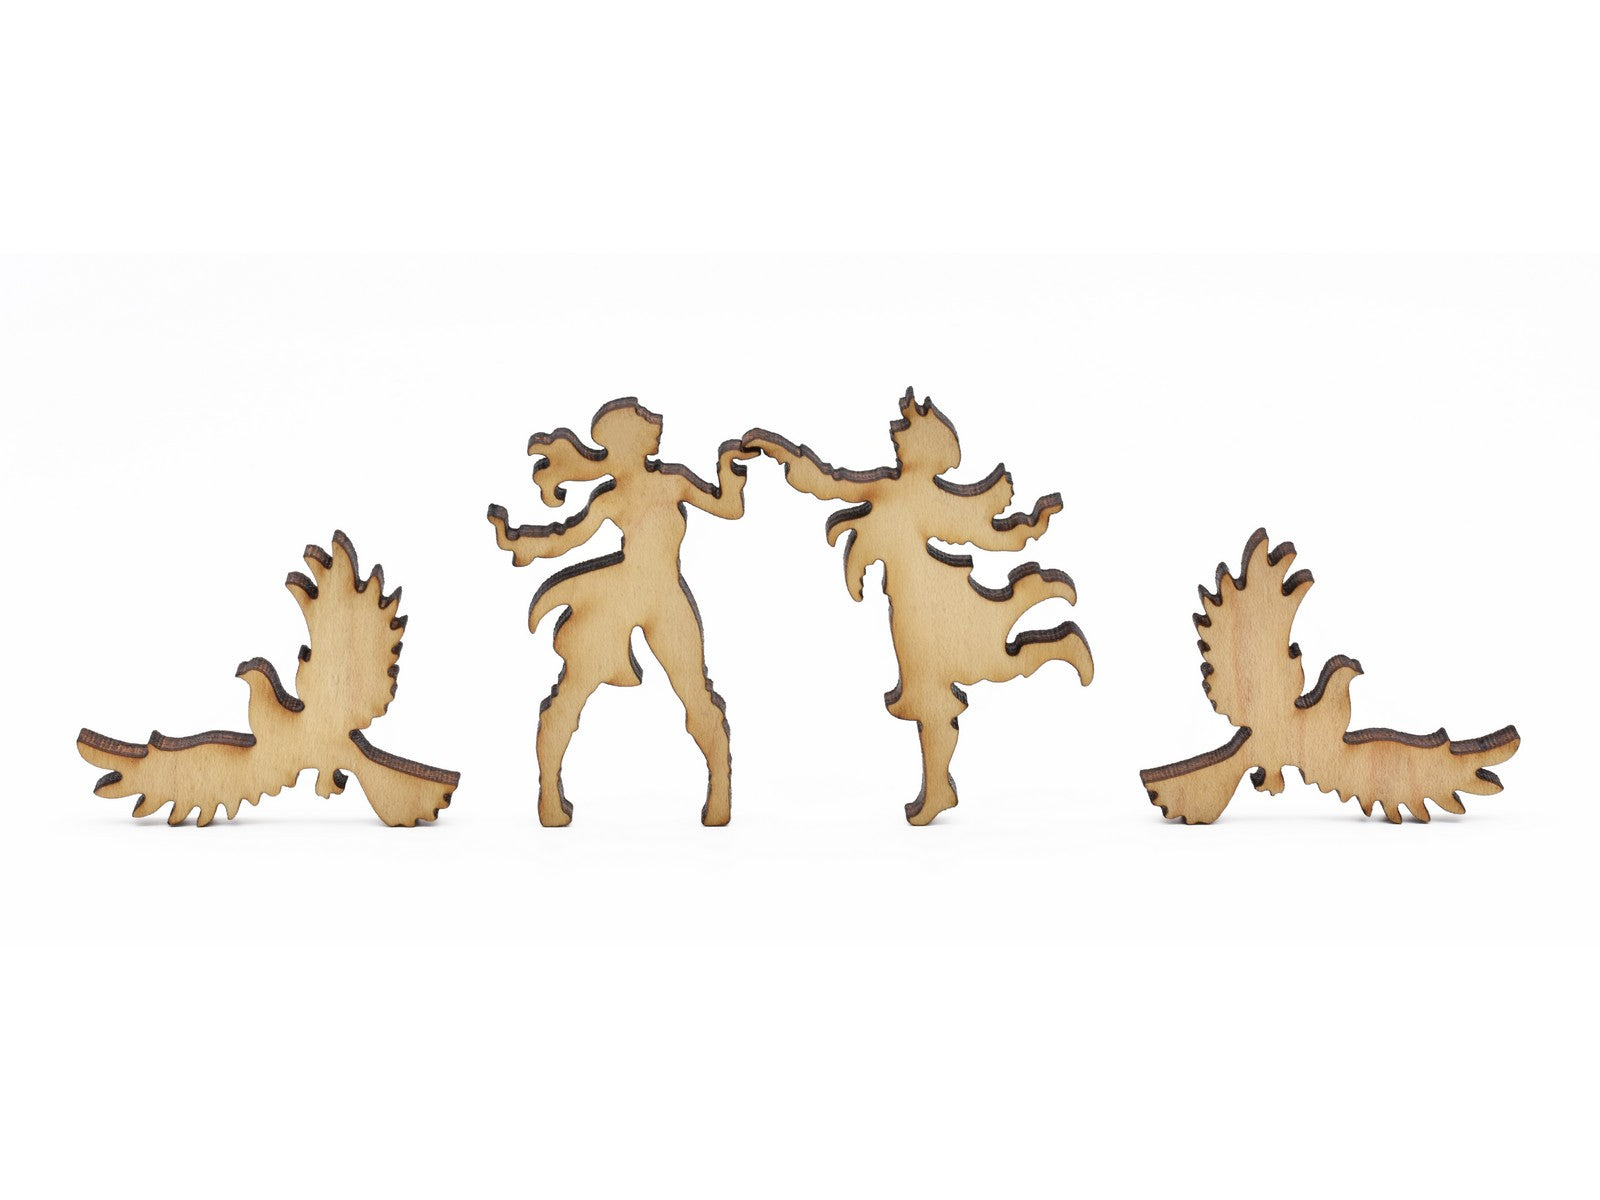 A closeup of pieces in the shape of a couple dancing and birds flying.